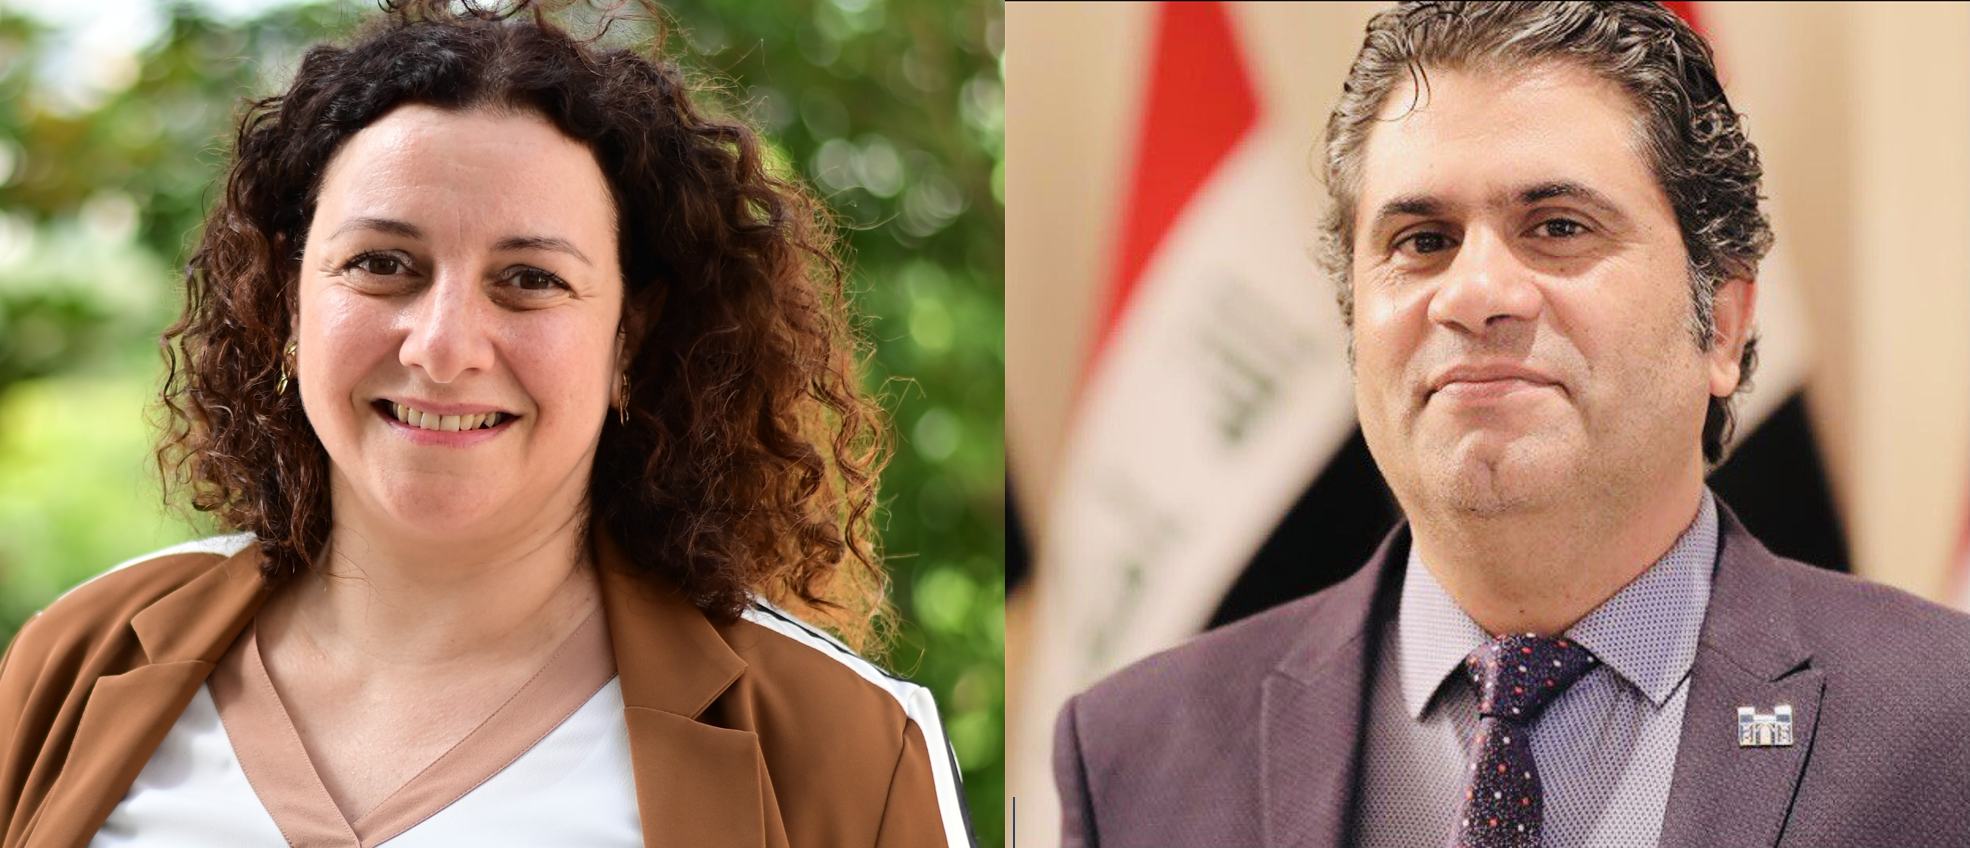 Ibn Rushd Prize 2022 – Freedom of Religion: Jointly won by Nayla Tabbara from Lebanon and Saad Salloum from Iraq